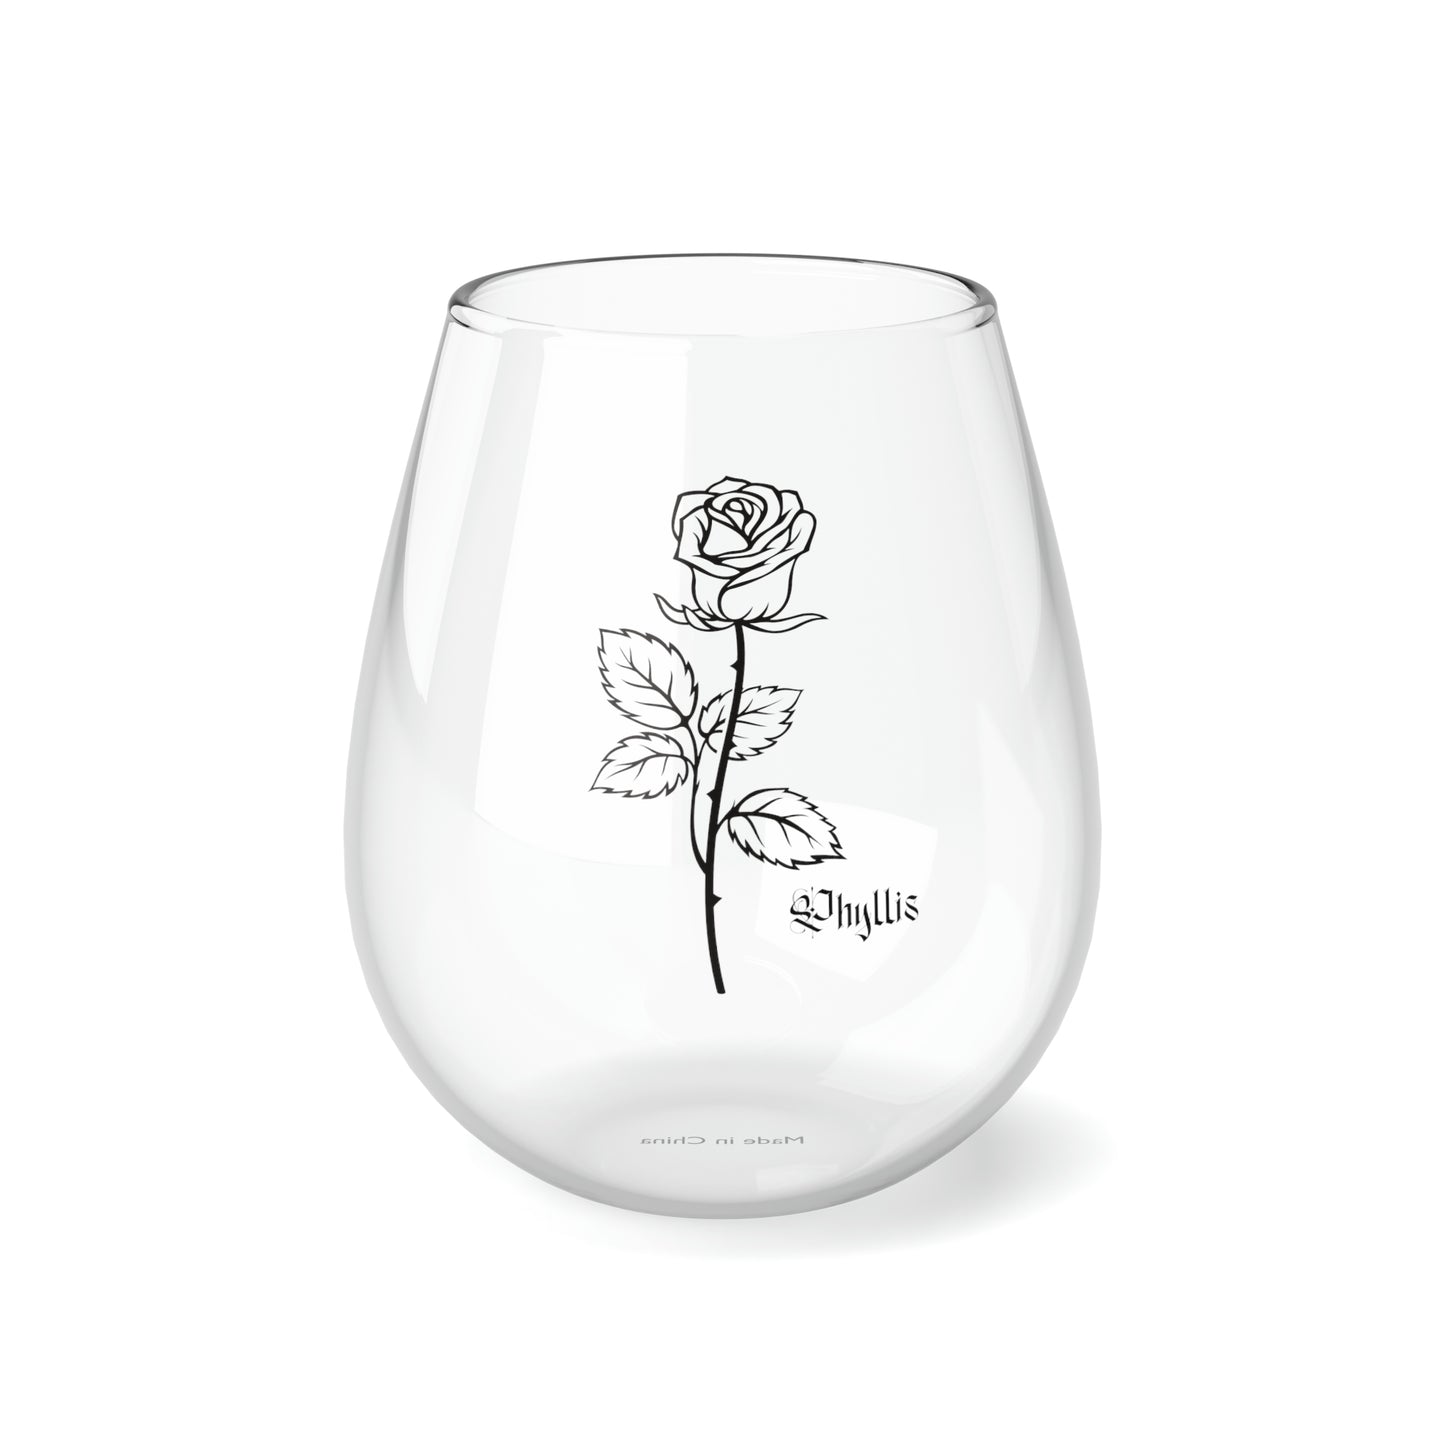 June PERSONALIZED Birth Flower Wine Glass, Birth Flower Gifts, Birth Flower wine glass, Birth Flower Gifts for Women, Gift for coworker, sister gift, birthday gift, Valentine gift, Stemless Wine Glass, 11.75oz